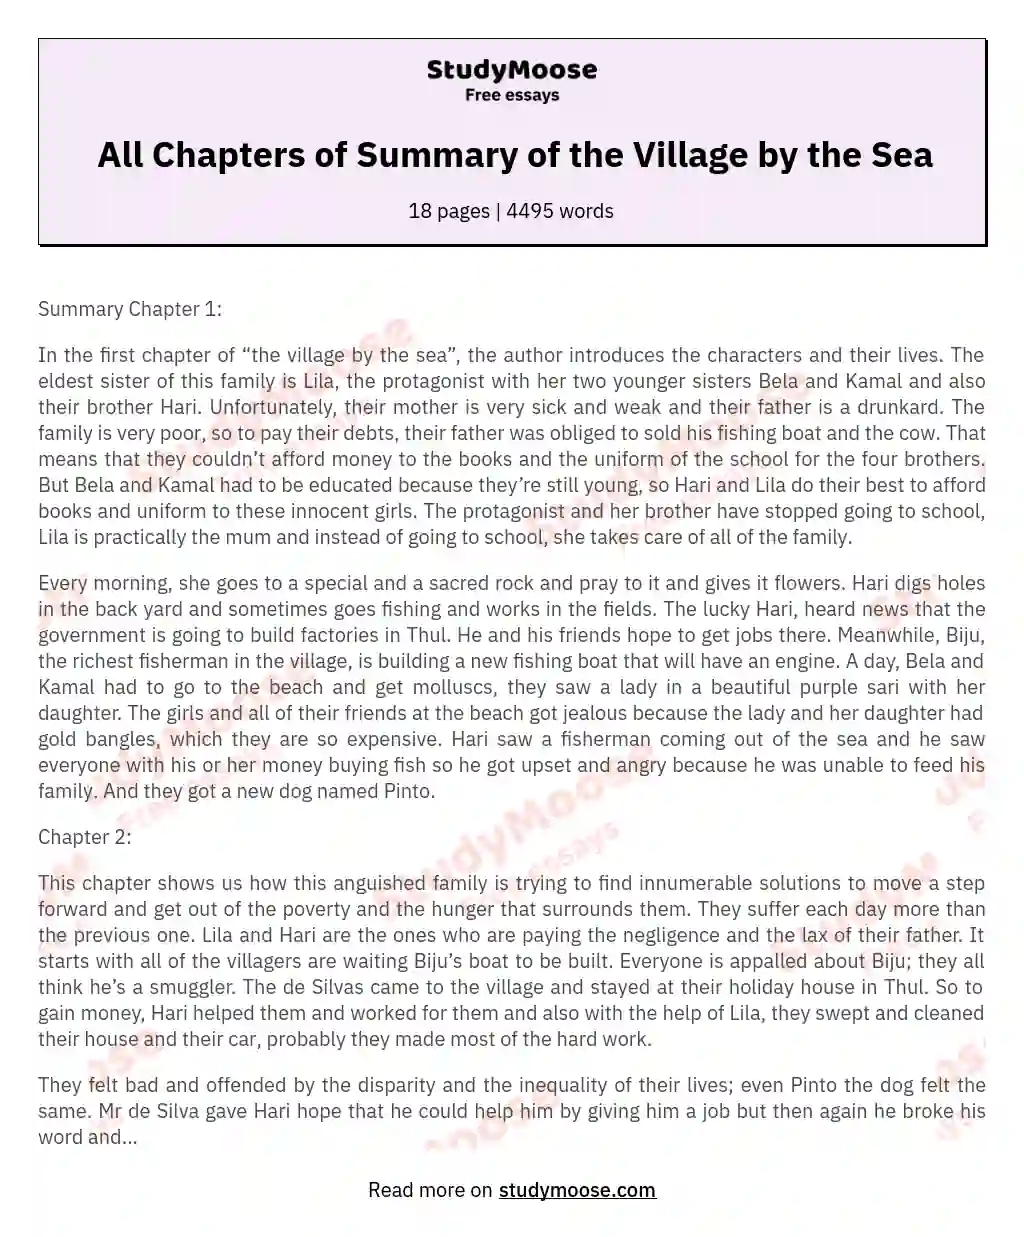 All Chapters of Summary of the Village by the Sea essay